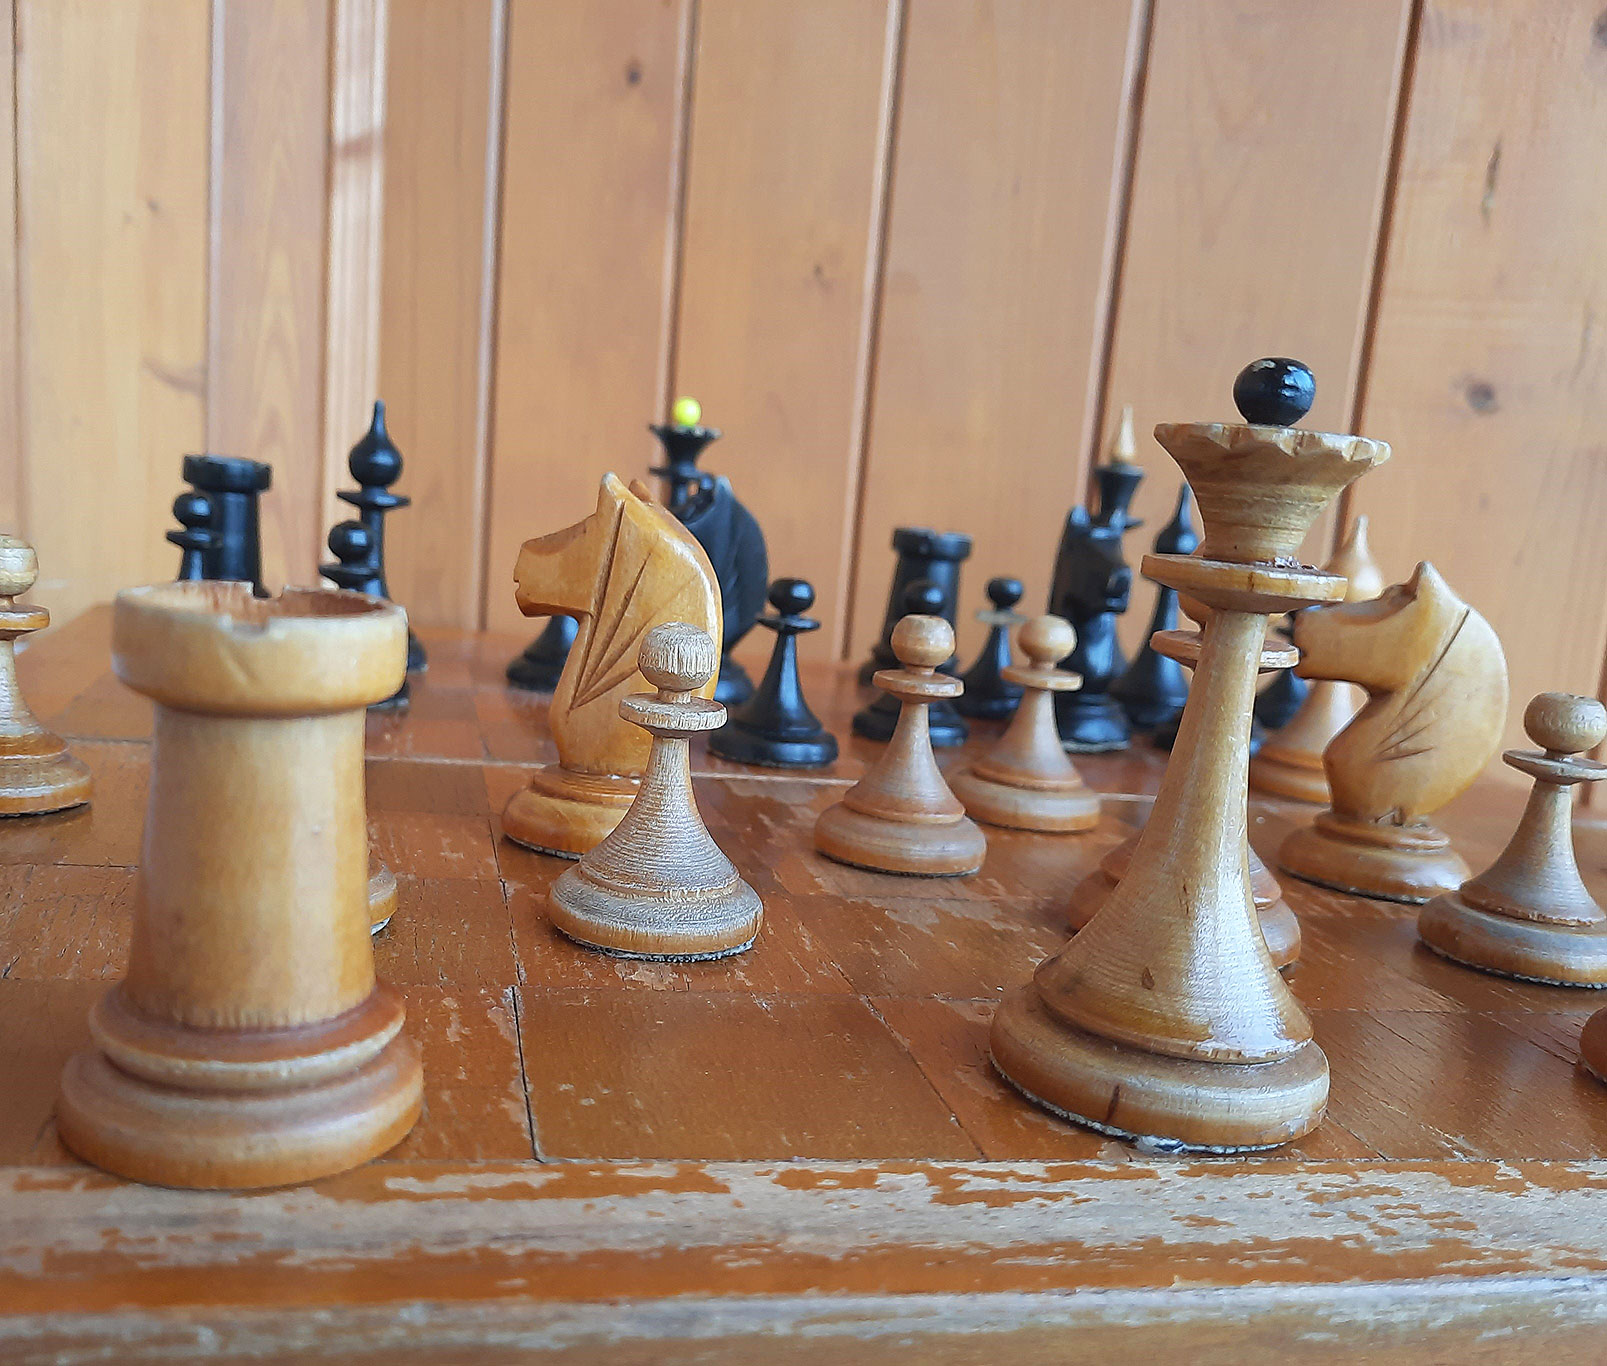 Soviet Chess Set Made 1984 Roman Warriors and Wooden 20 Inch 